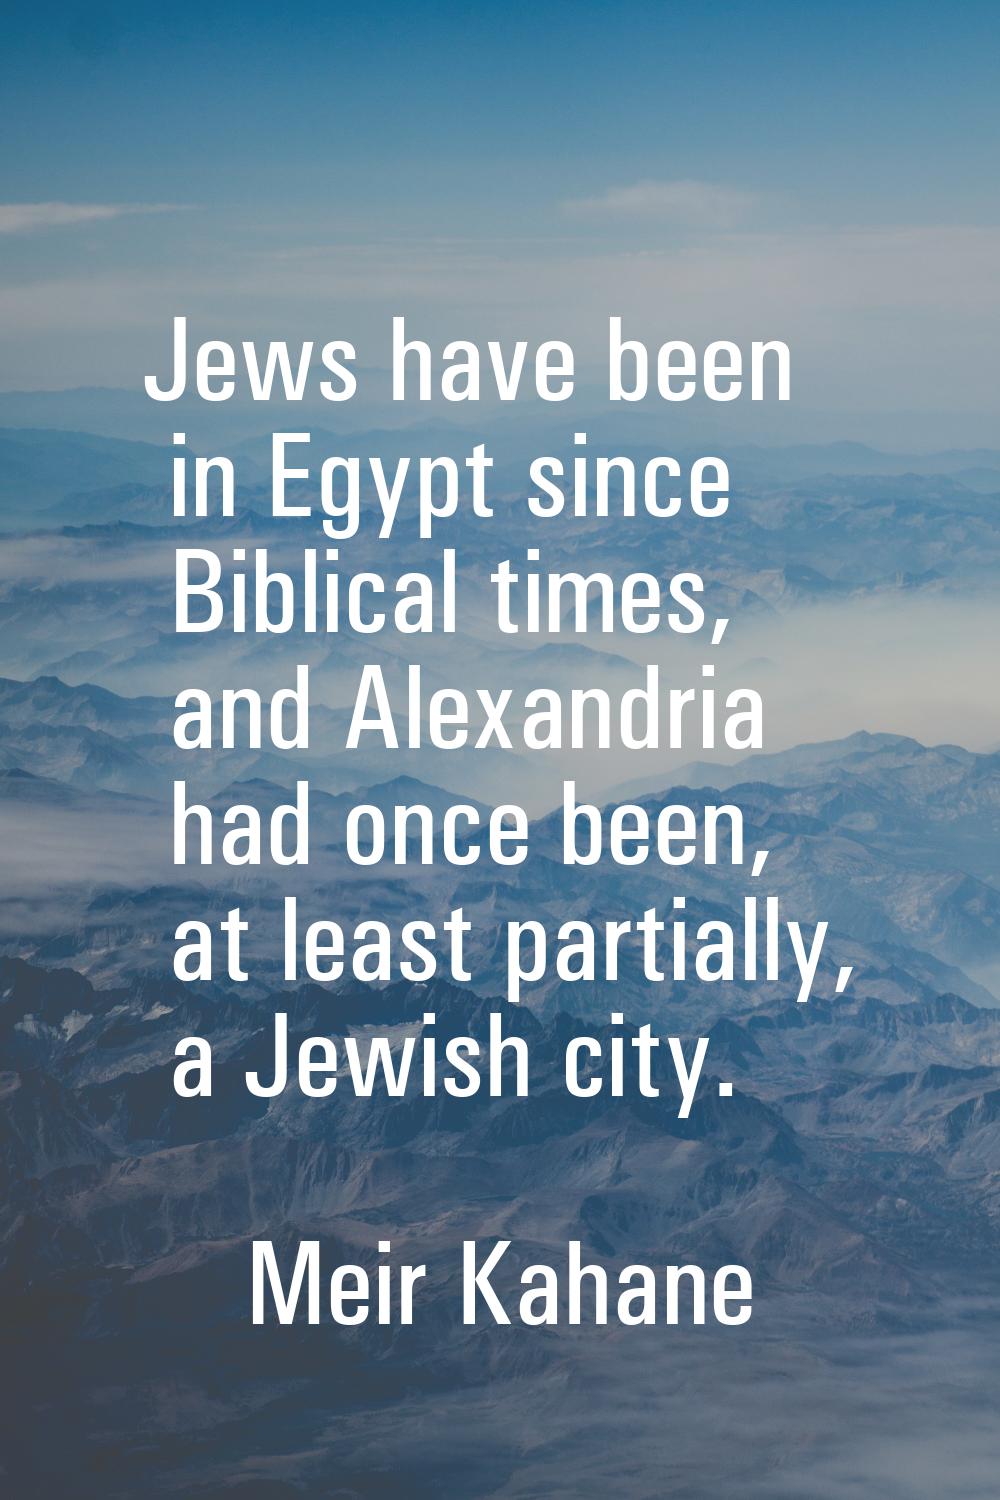 Jews have been in Egypt since Biblical times, and Alexandria had once been, at least partially, a J